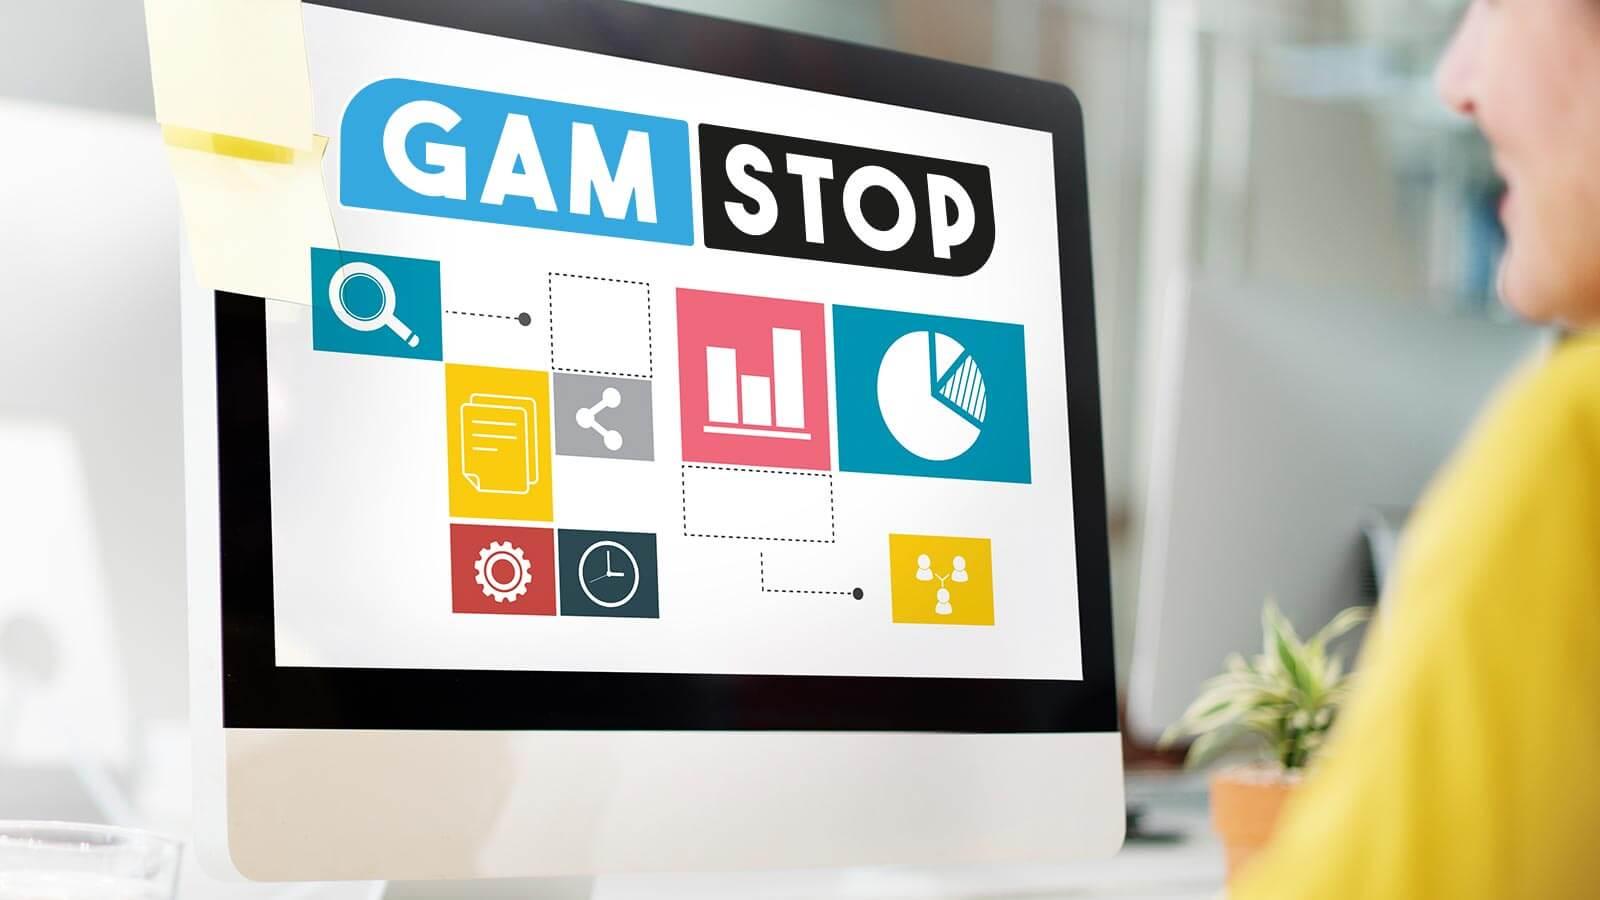 A practical introduction to Gamstop